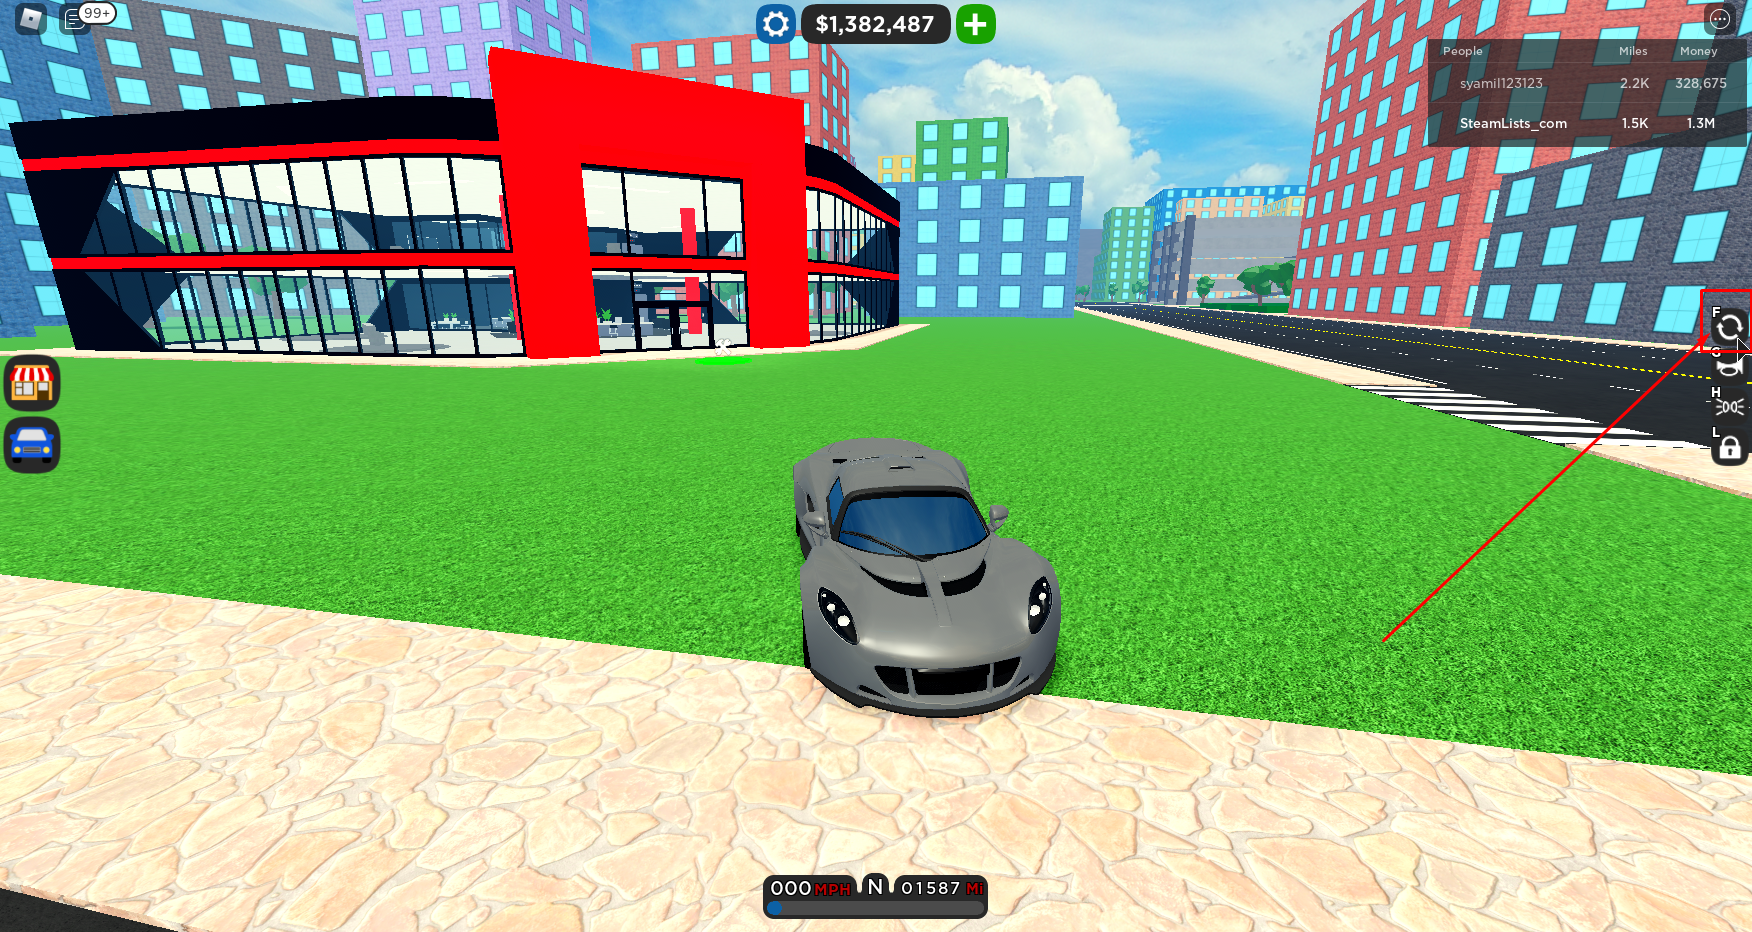 Roblox – Car Dealership Tycoon How to unstuck? 1 - steamlists.com